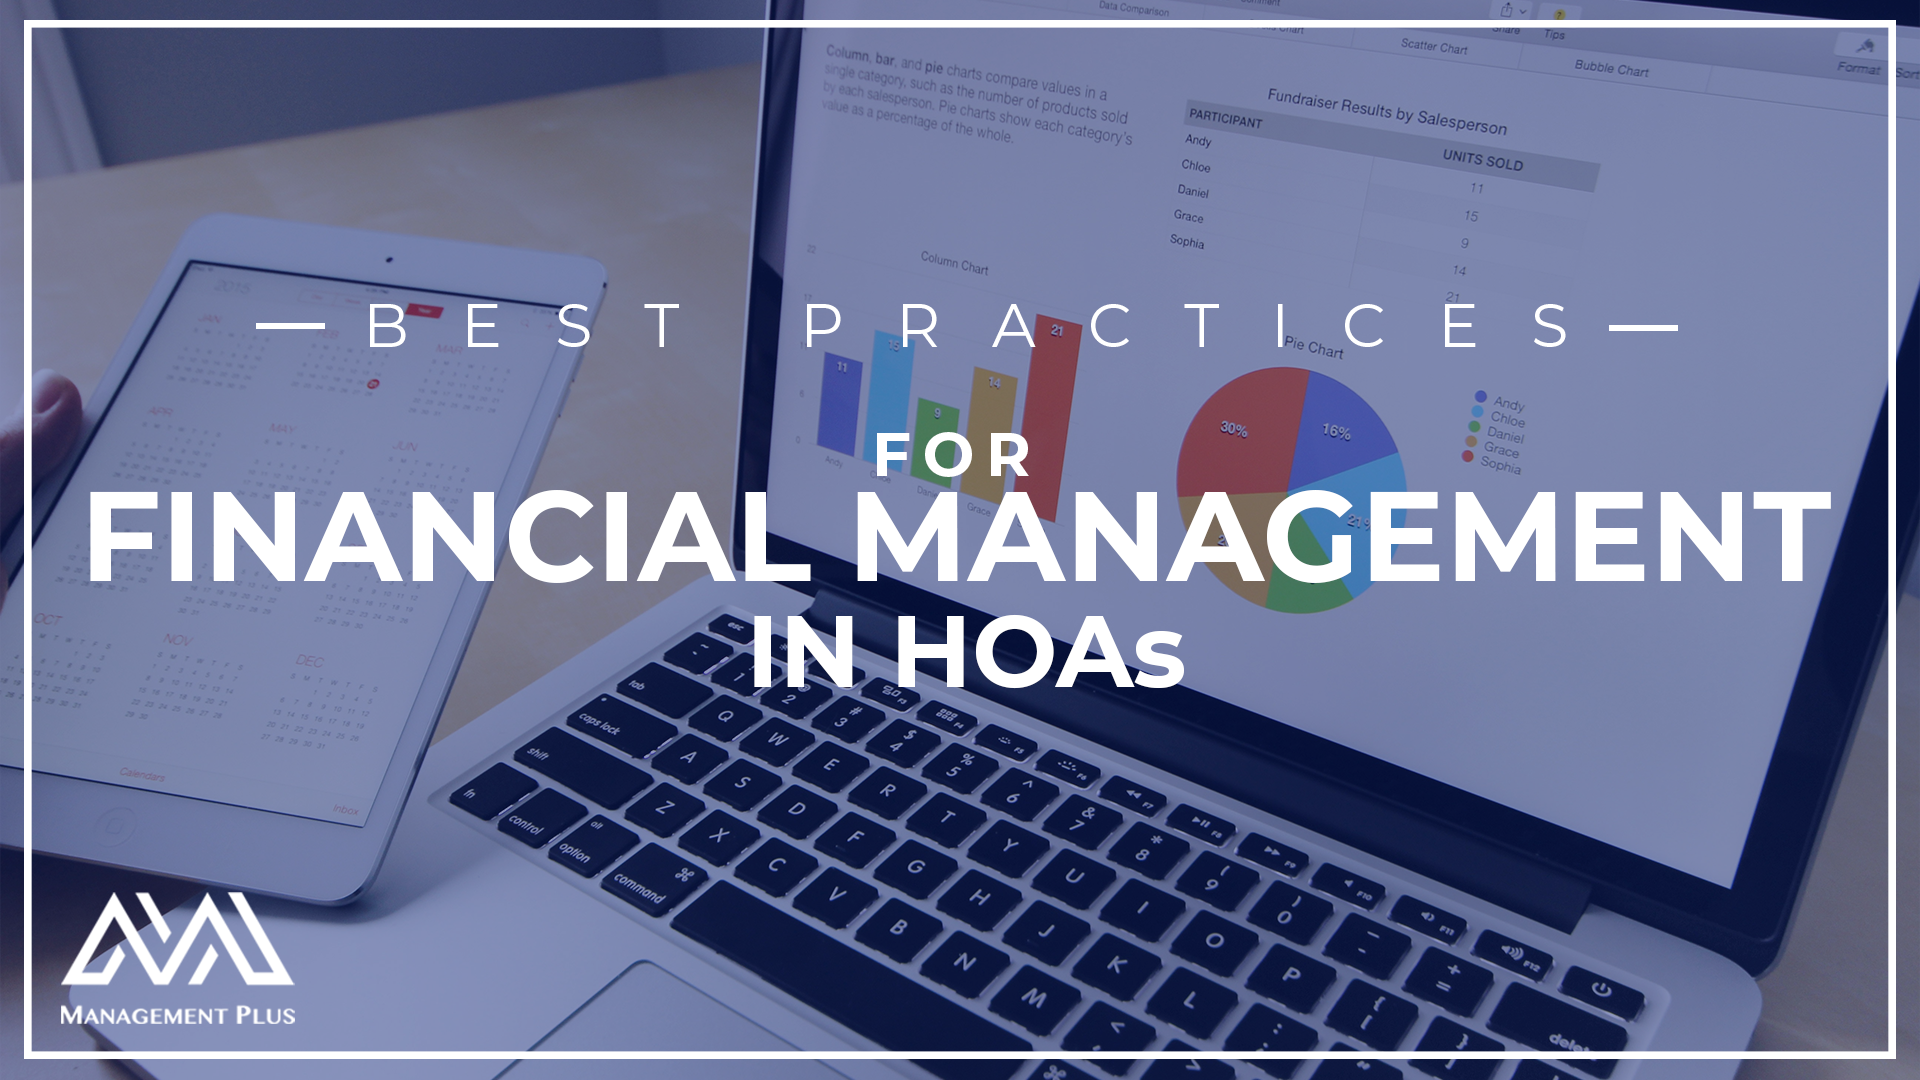 A smartphone and laptop. The text reads, "Best Practices for Financial Management in HOAs" 